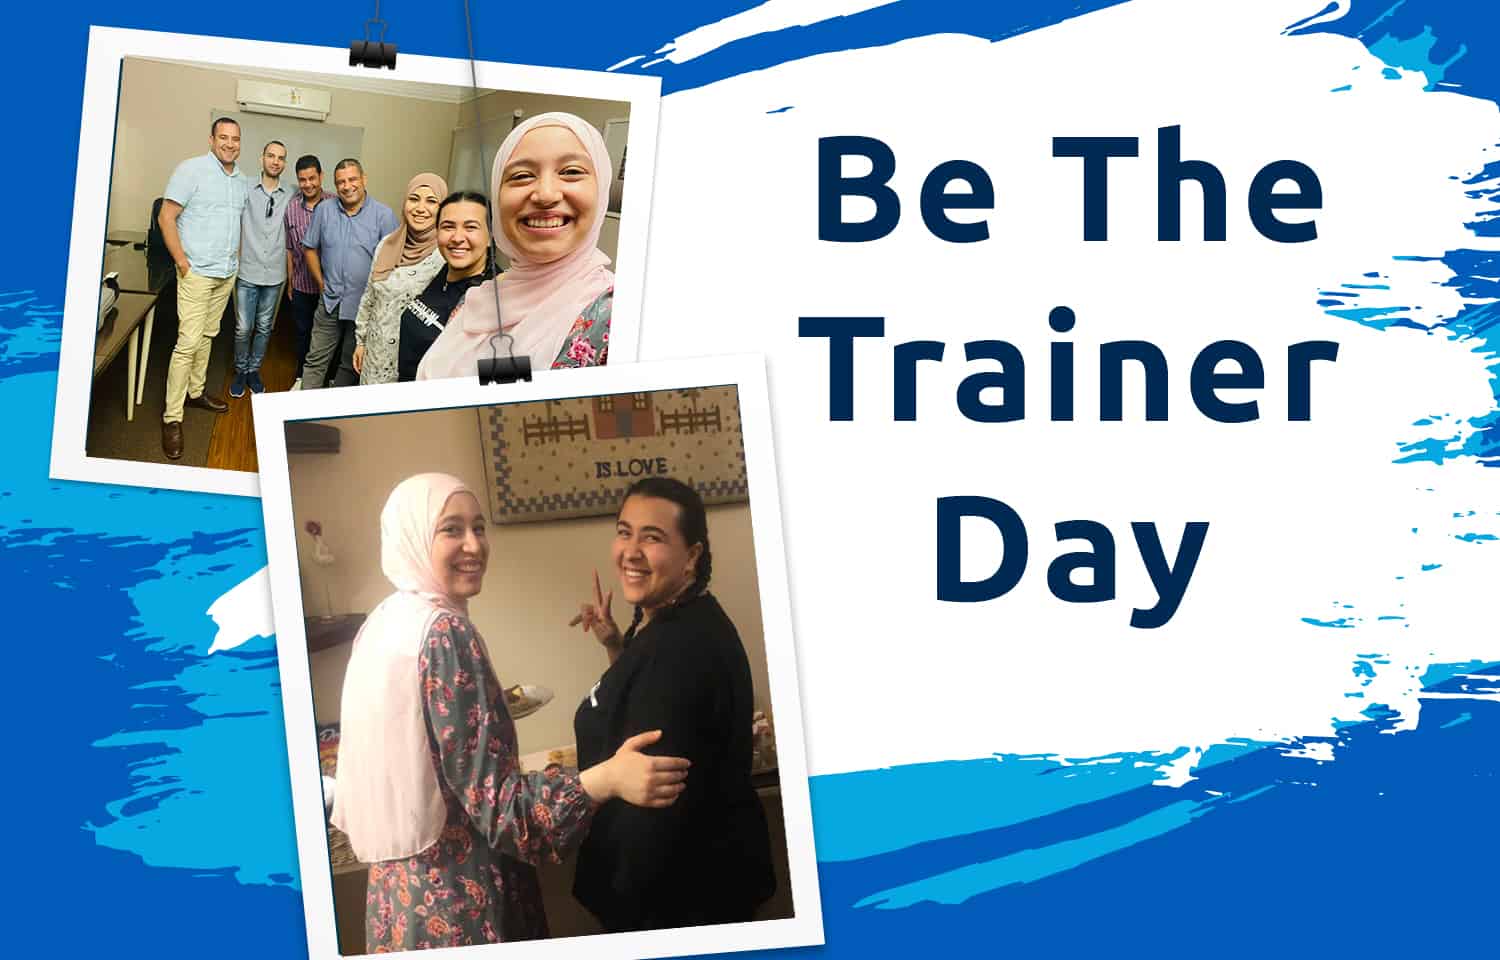 Be the trainer-day